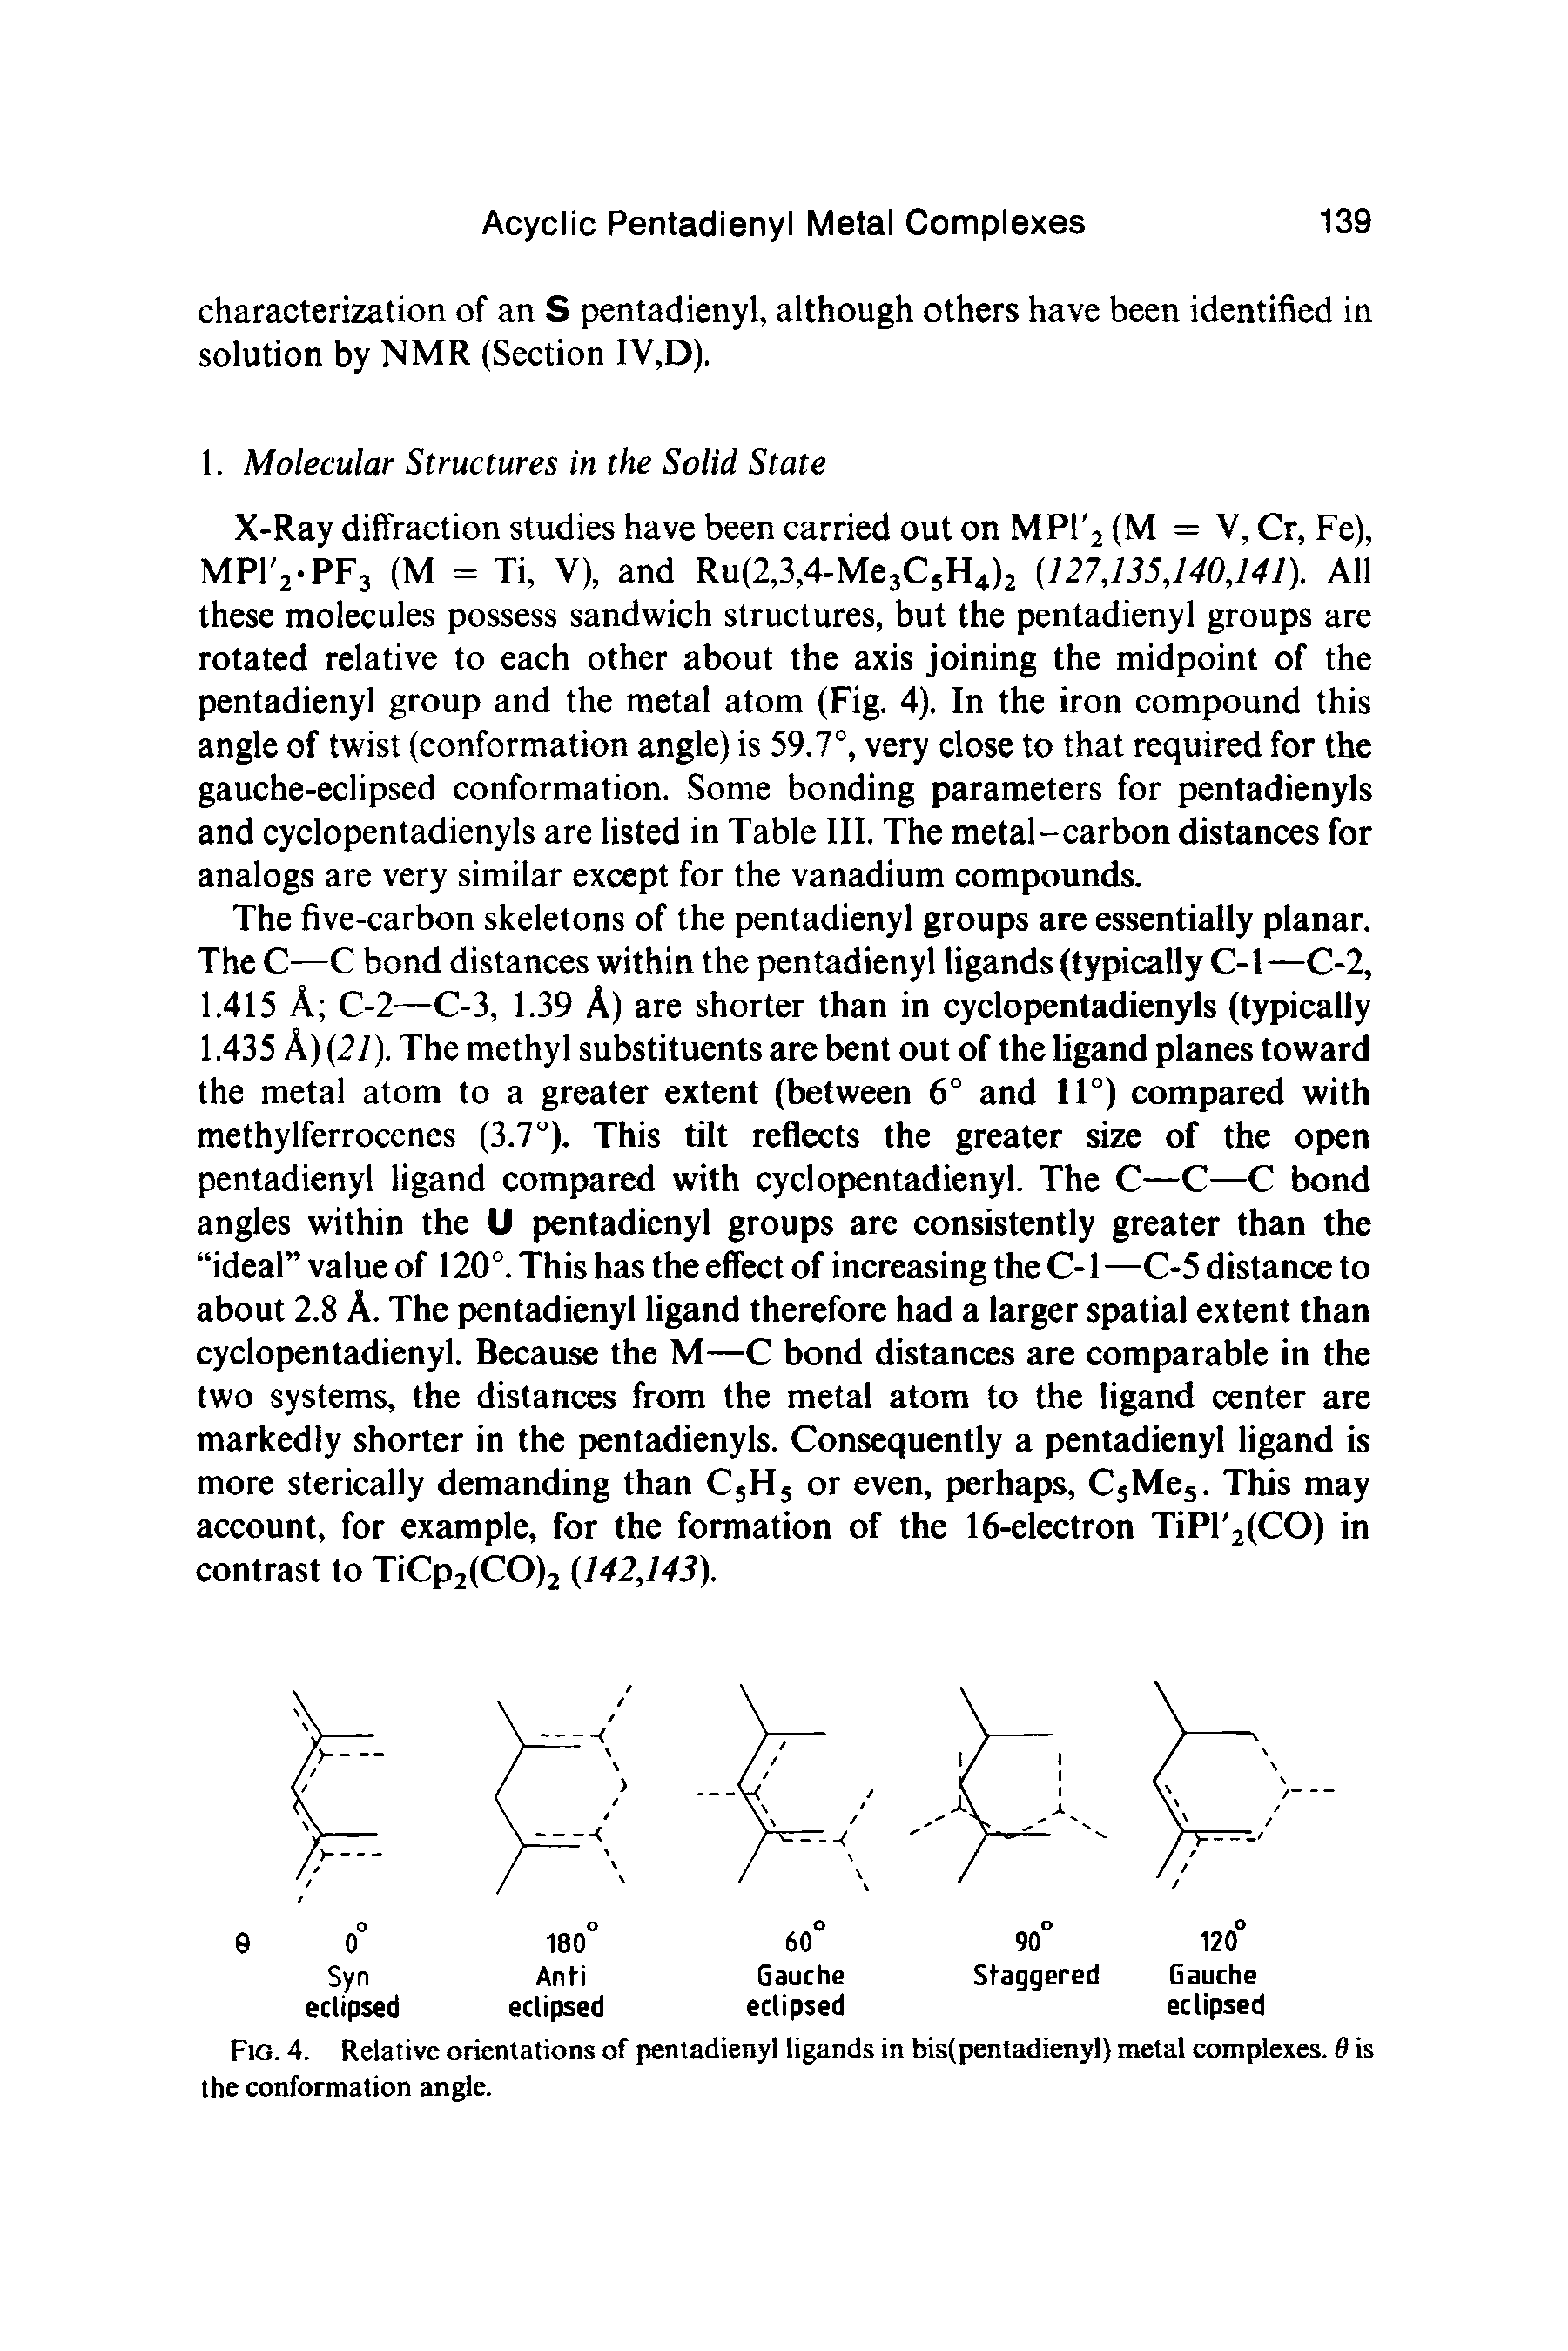 Fig. 4. Relative orientations of pentadienyl ligands in bis(pentadienyl) metal complexes. 9 is the conformation angle.